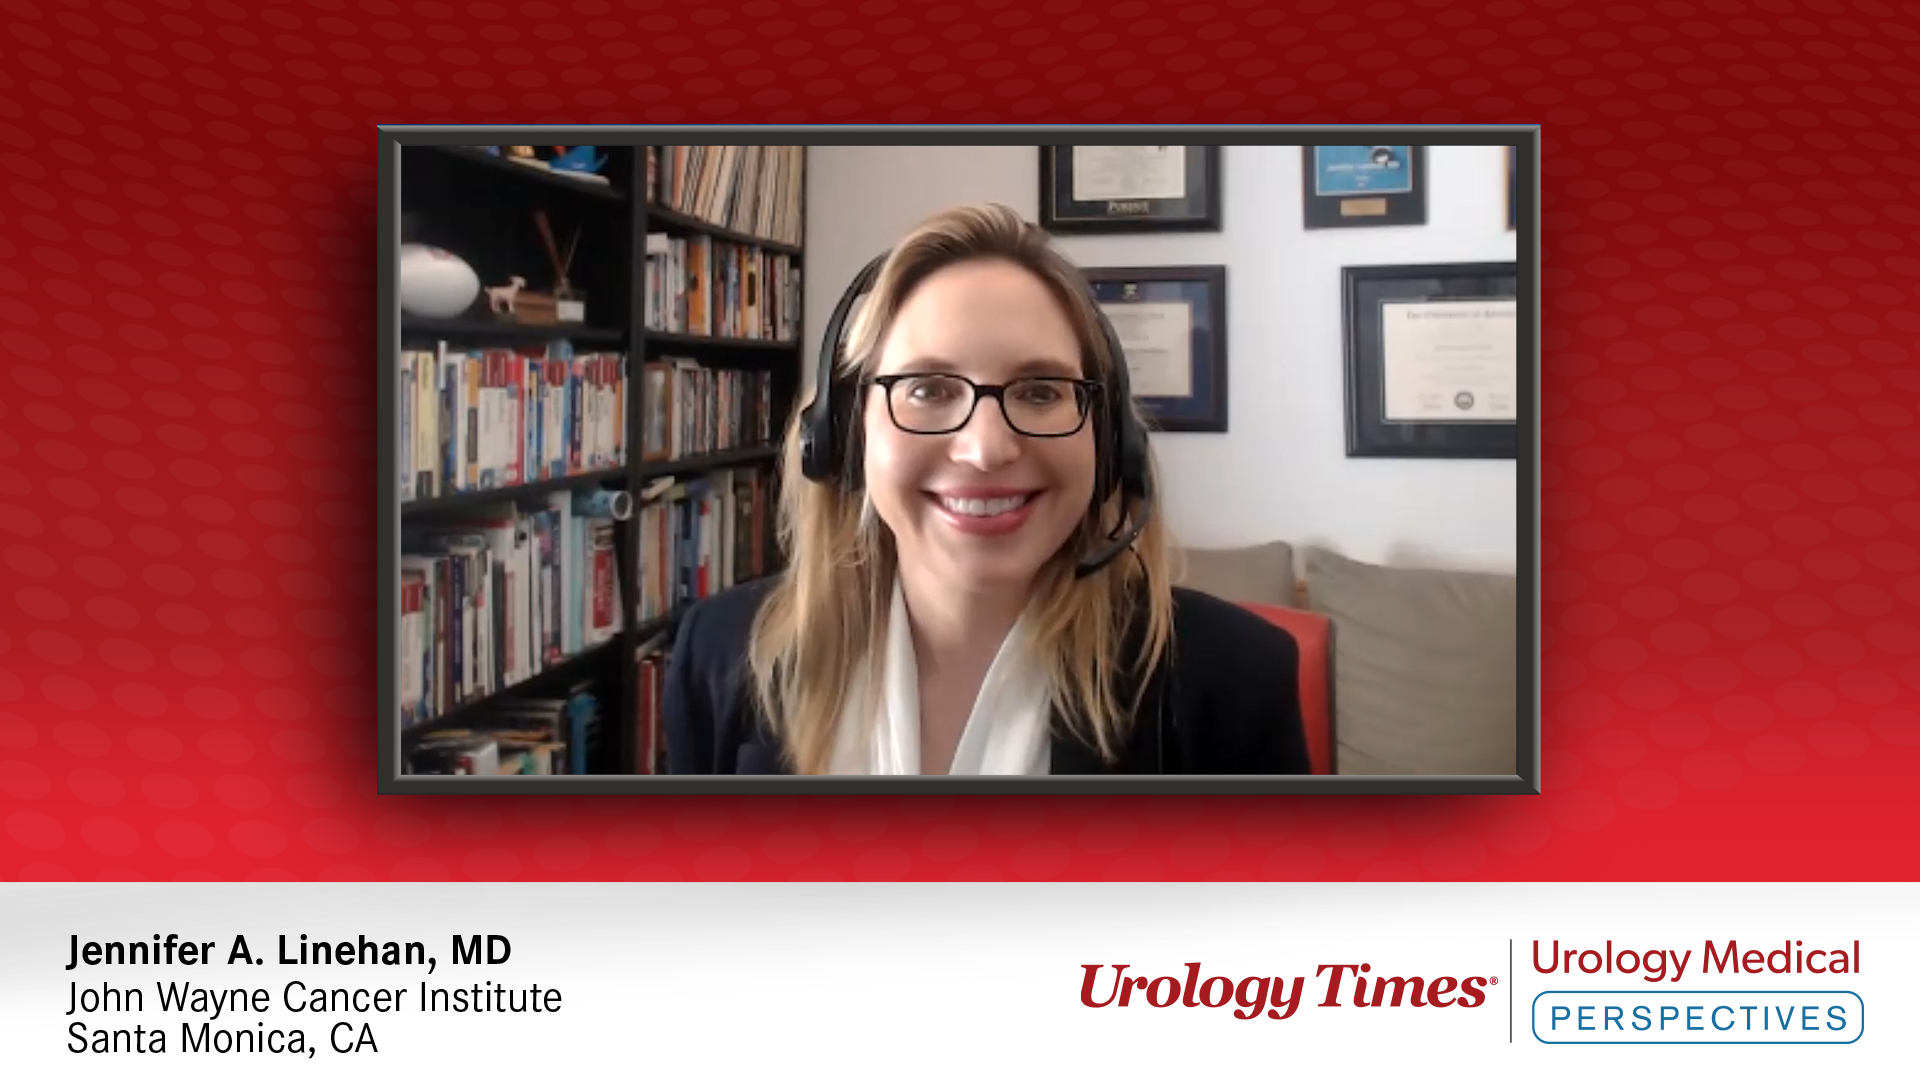 EP. 1A: Key Considerations in the Diagnosis and Treatment of Upper Tract Urothelial Carcinoma